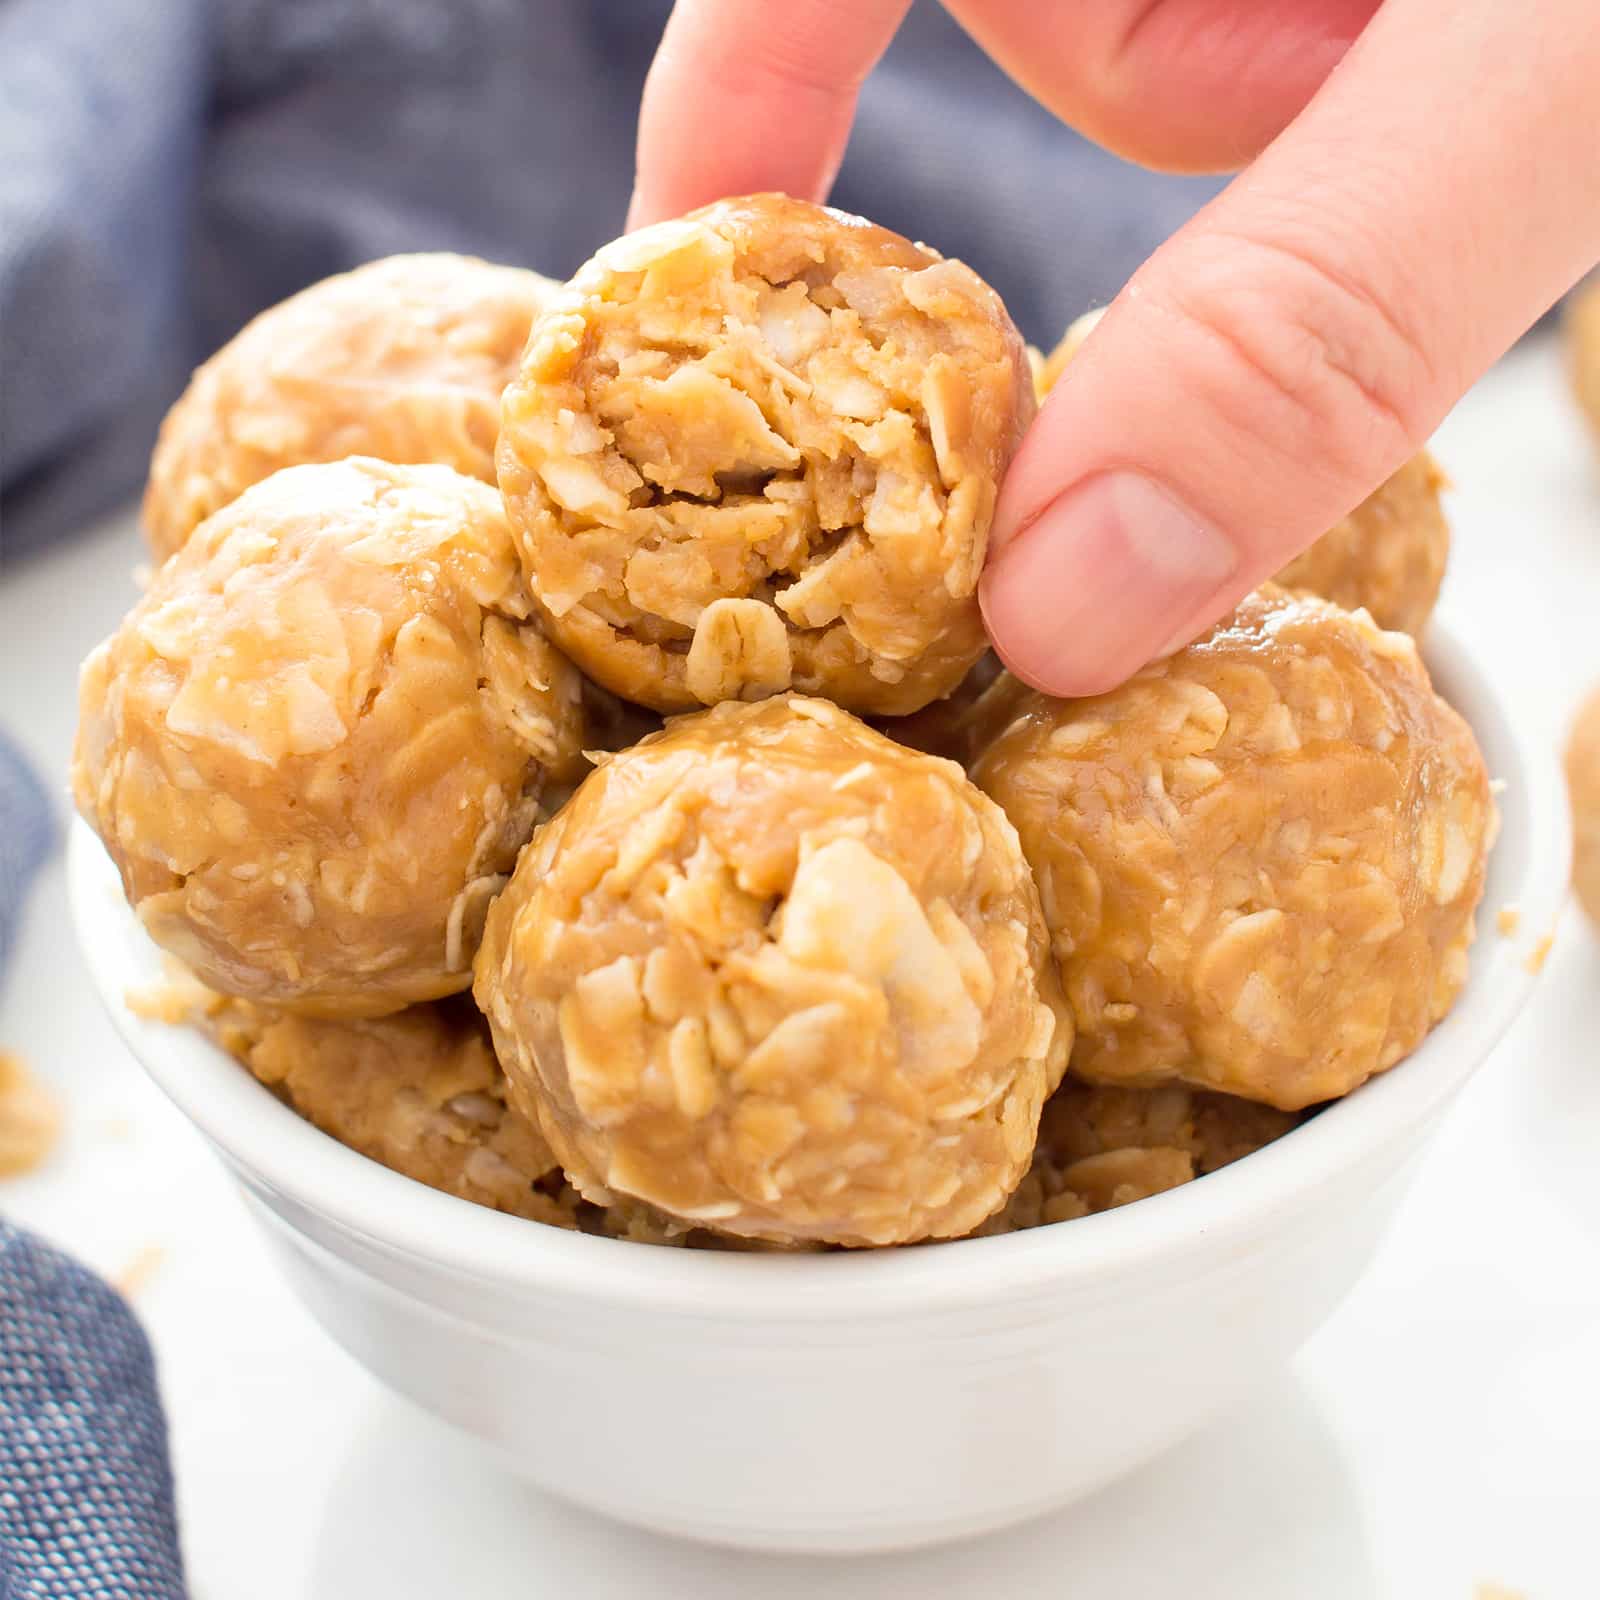 4 Ingredient No Bake Peanut Butter Coconut Energy Bites (Gluten-Free, Vegan, Dairy-Free, One Bowl, Protein-Packed)